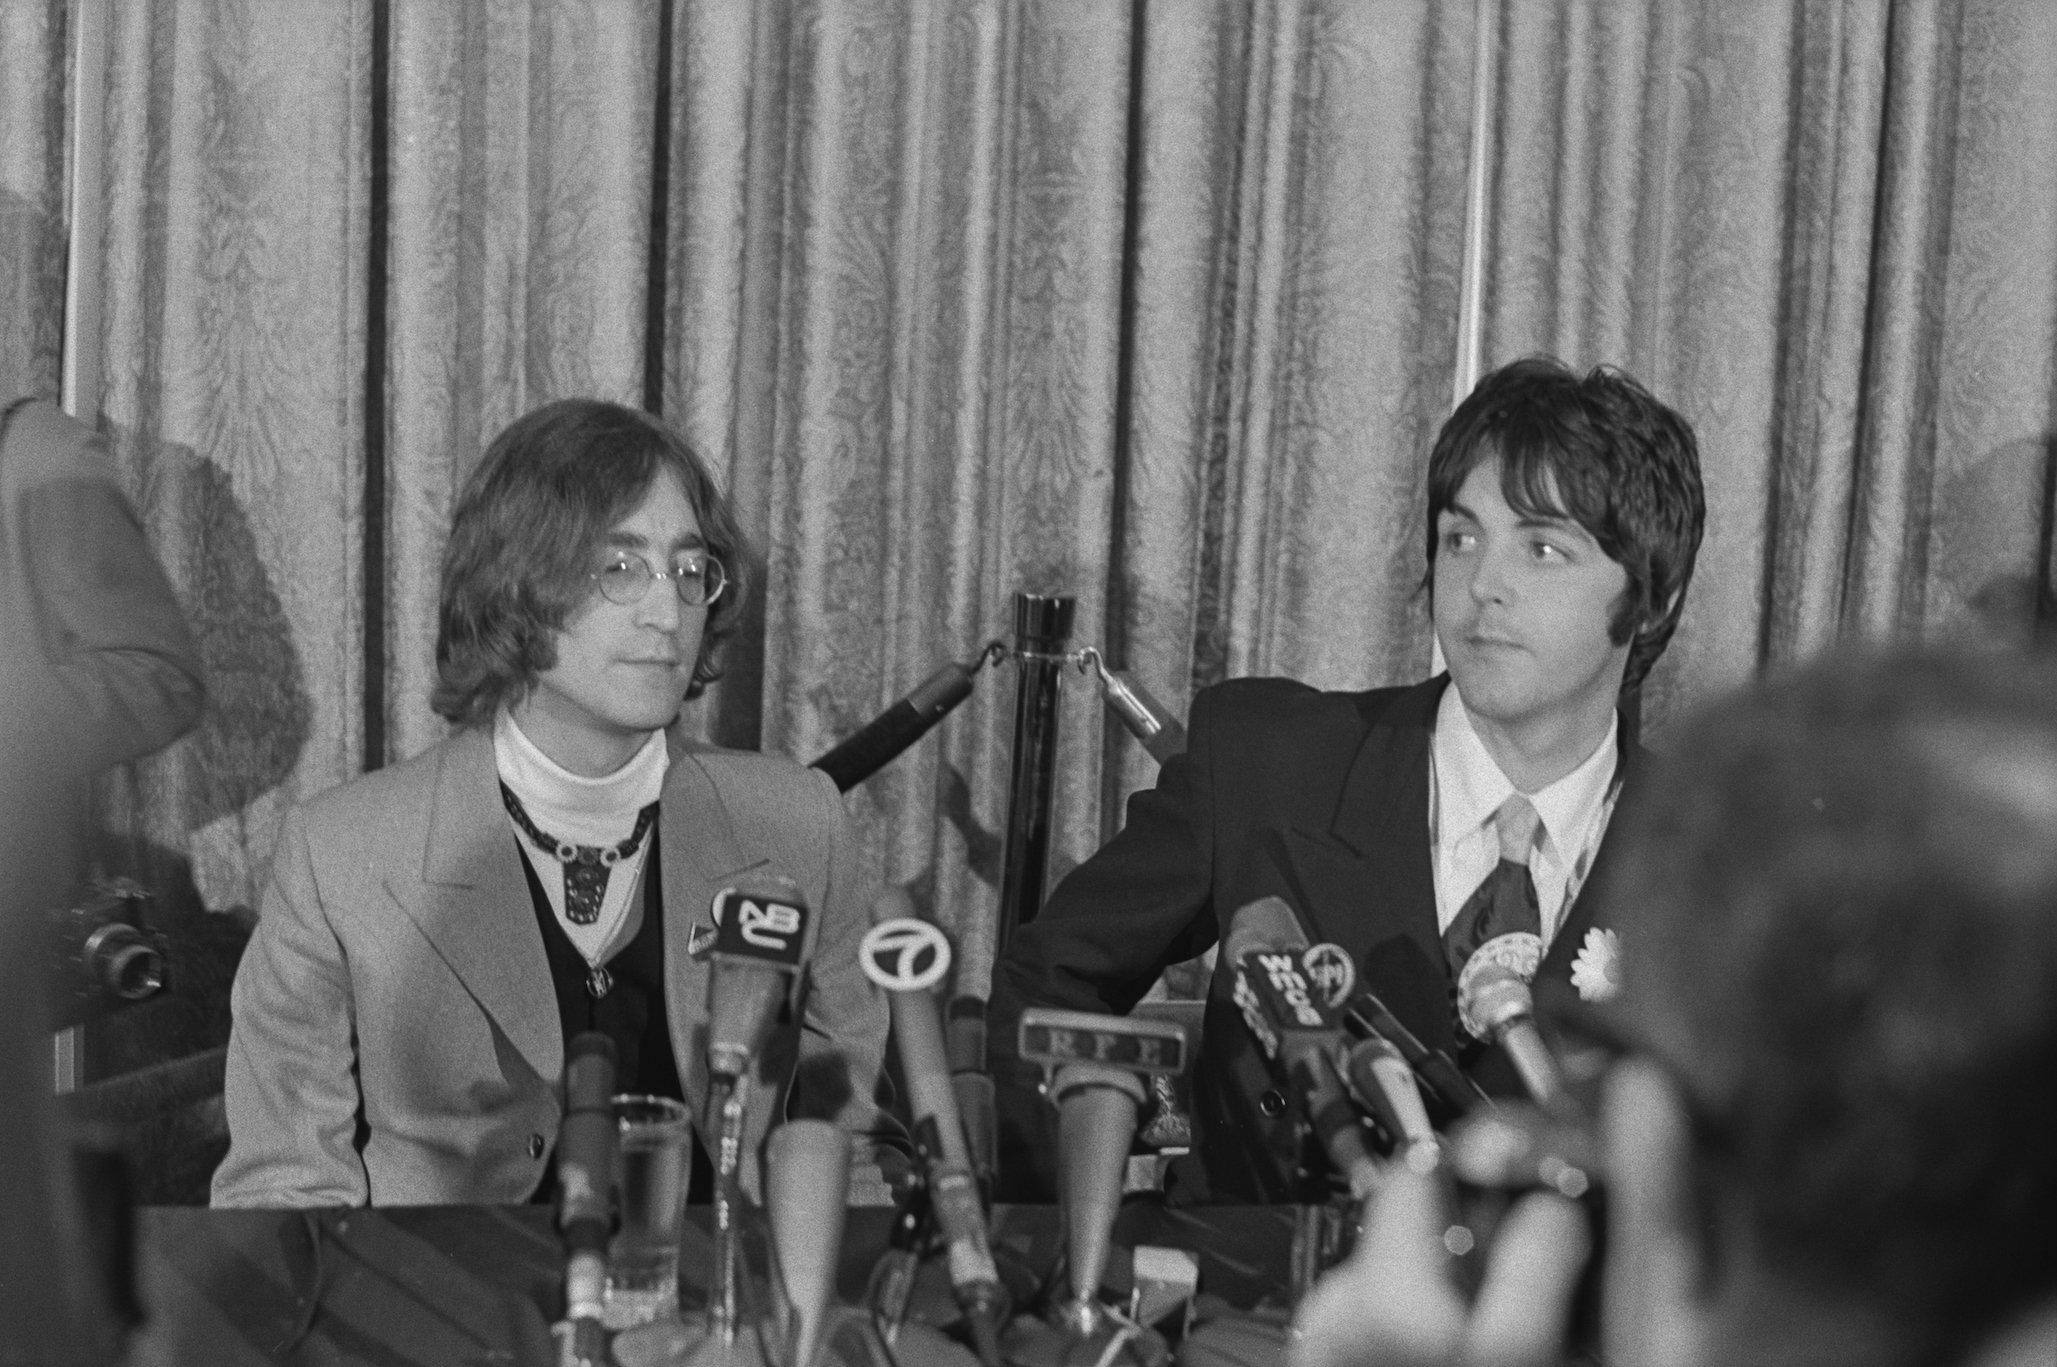 John Lennon and Paul McCartney of The Beatles hold a press conference for Apple Corps. 